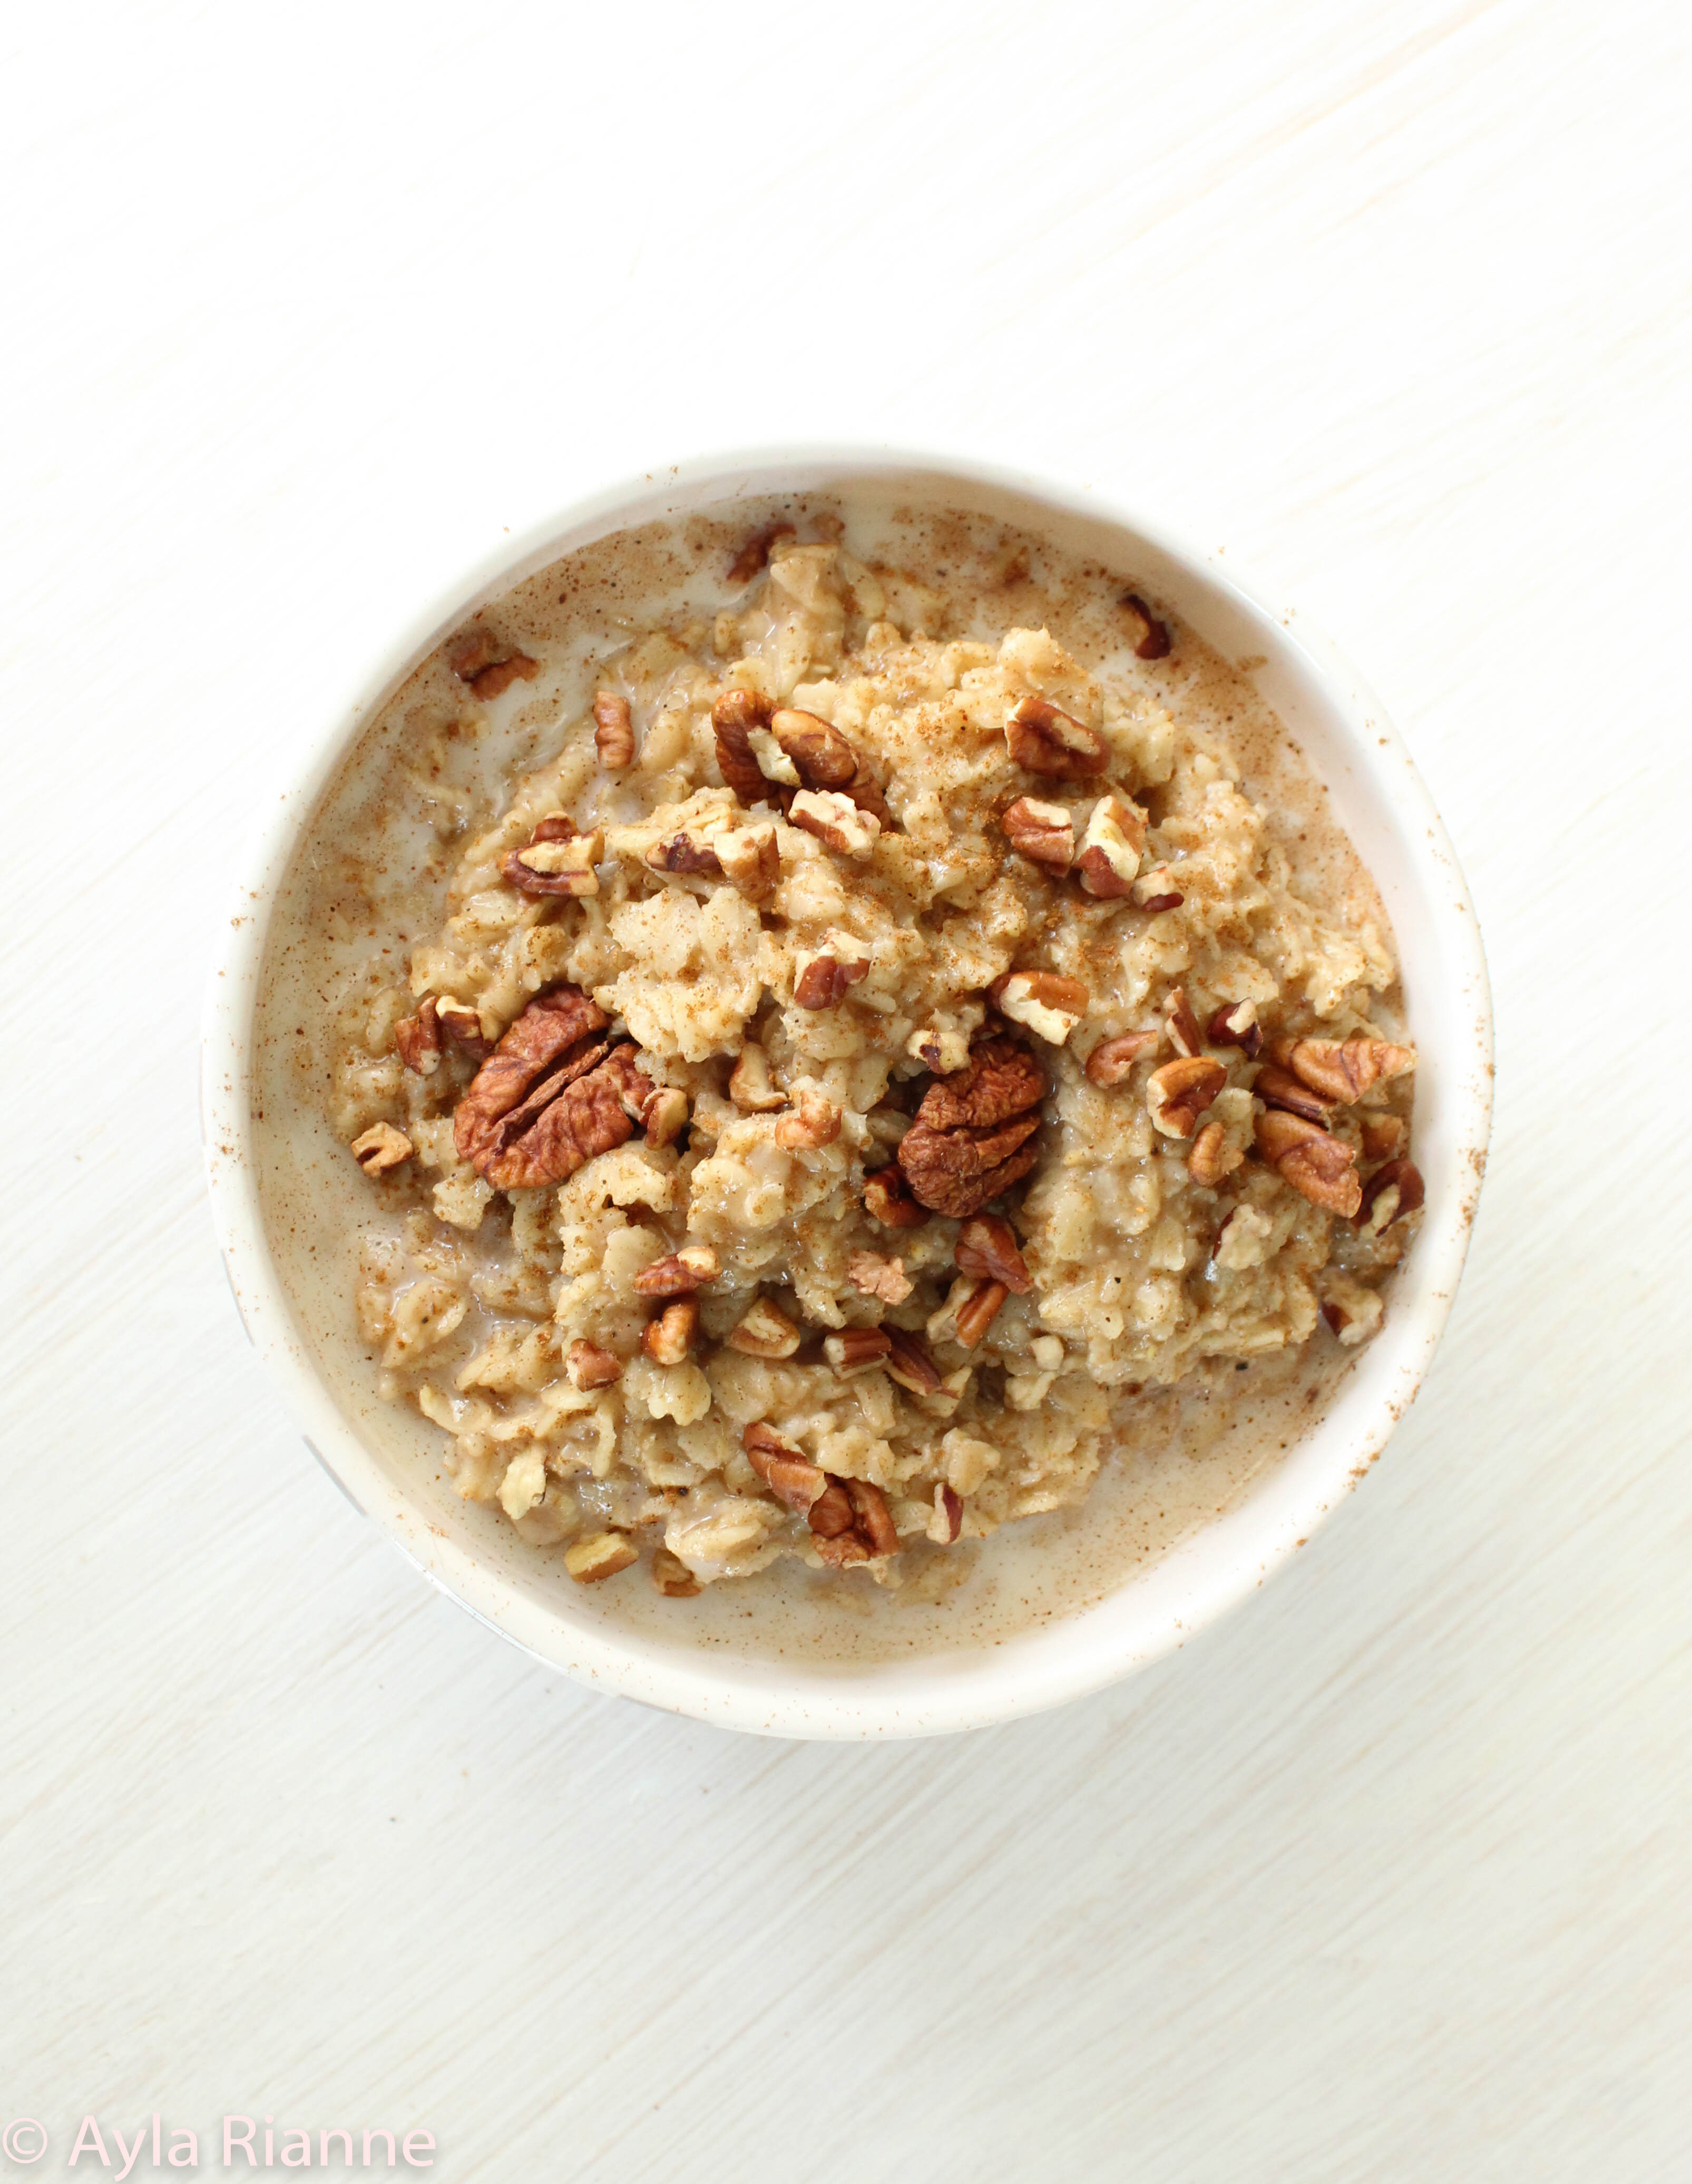 Vanilla Chai Spiced Oatmeal topped with pecans and almond milk #oatmeal #chaispice